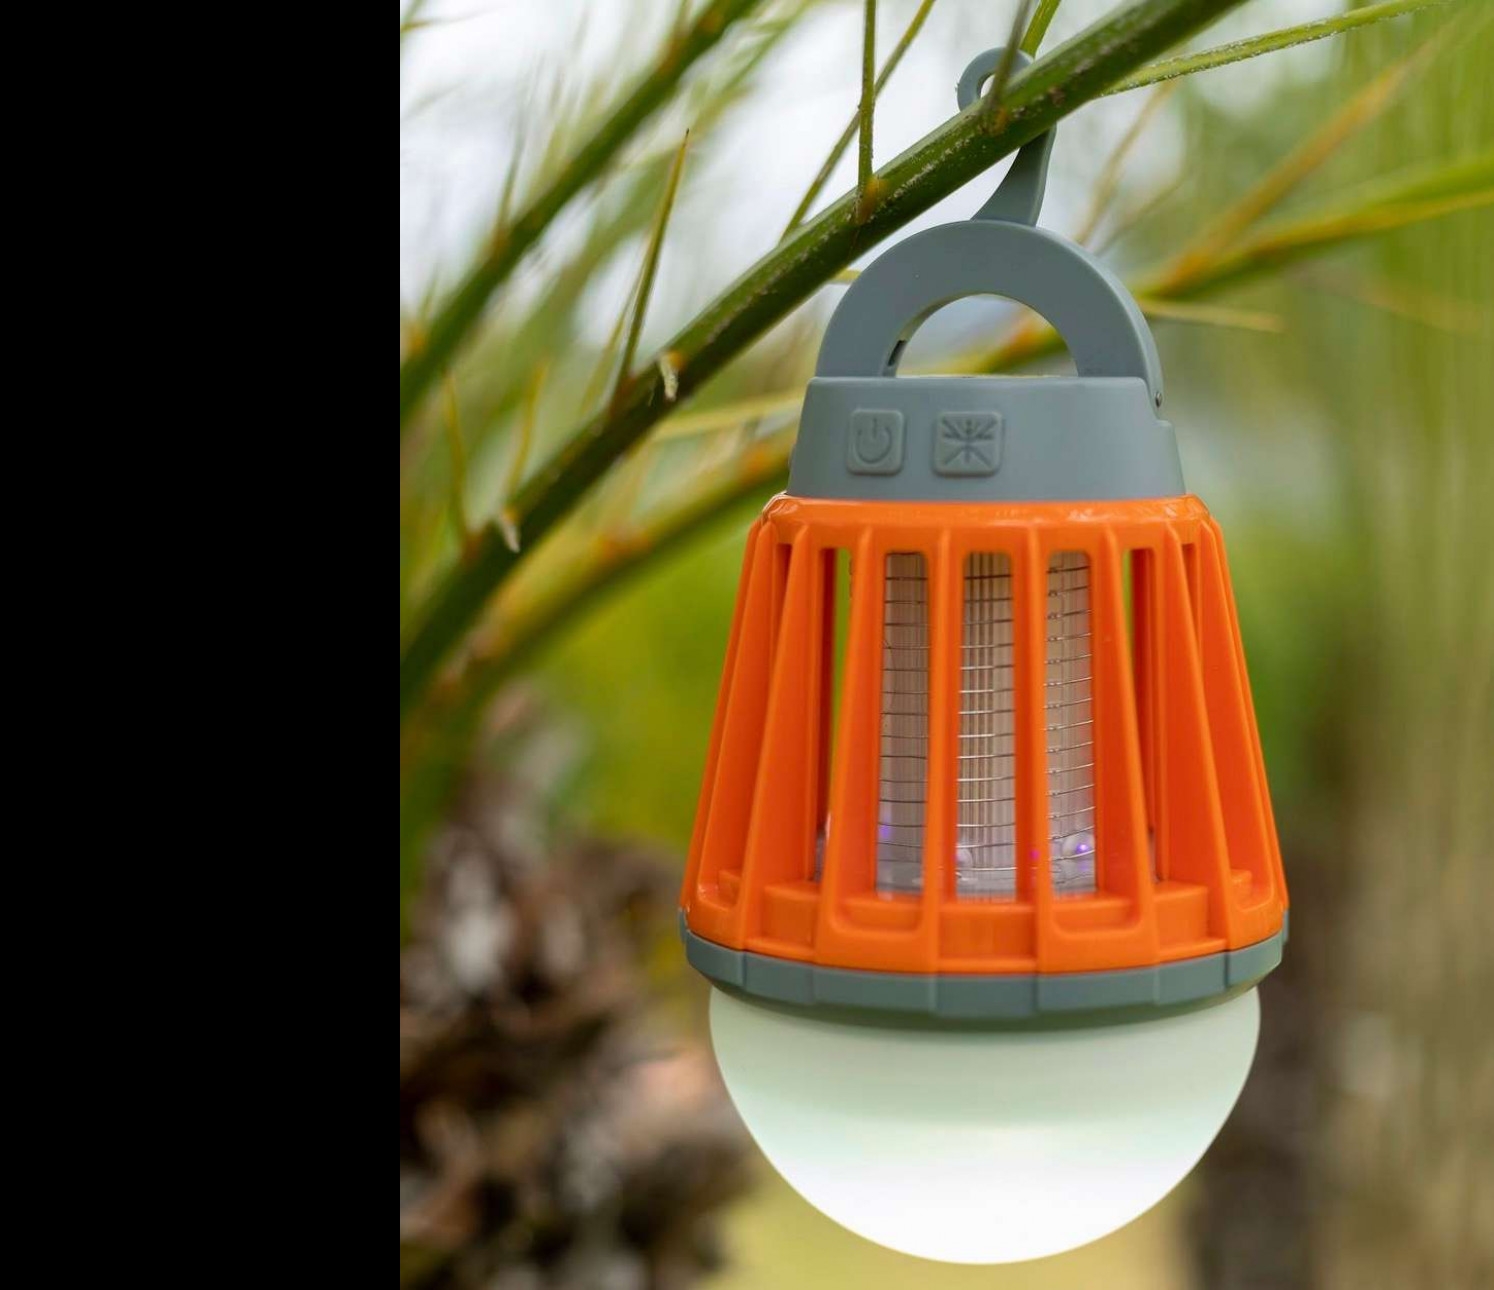 Cheapest Place To Buy Bug Bulb